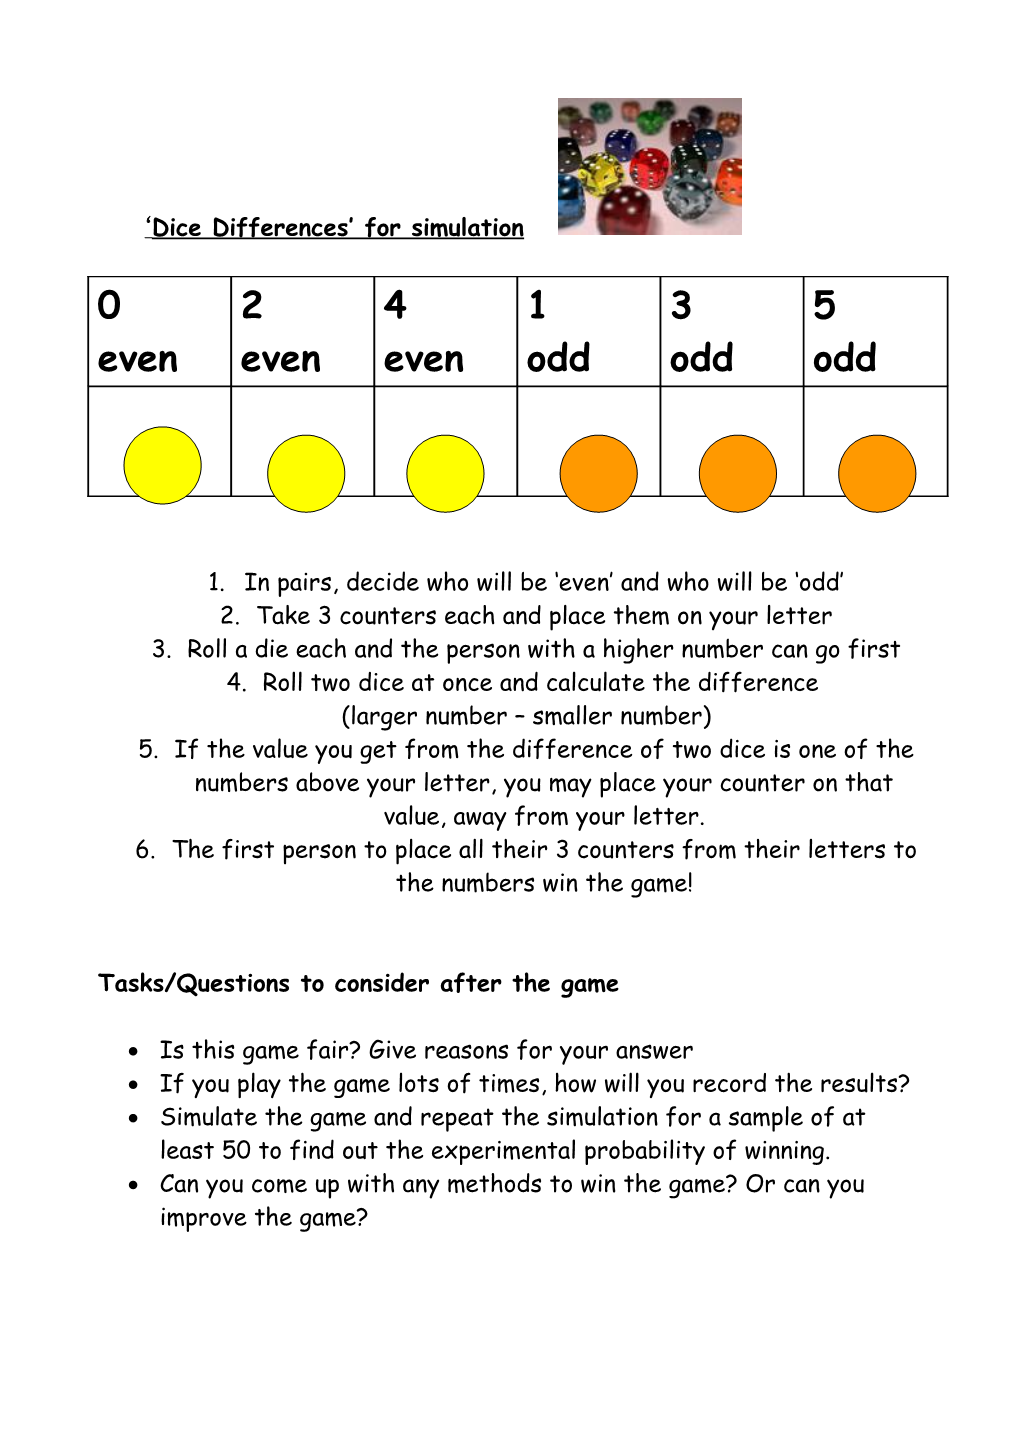 Instructions for Dice Differences Game